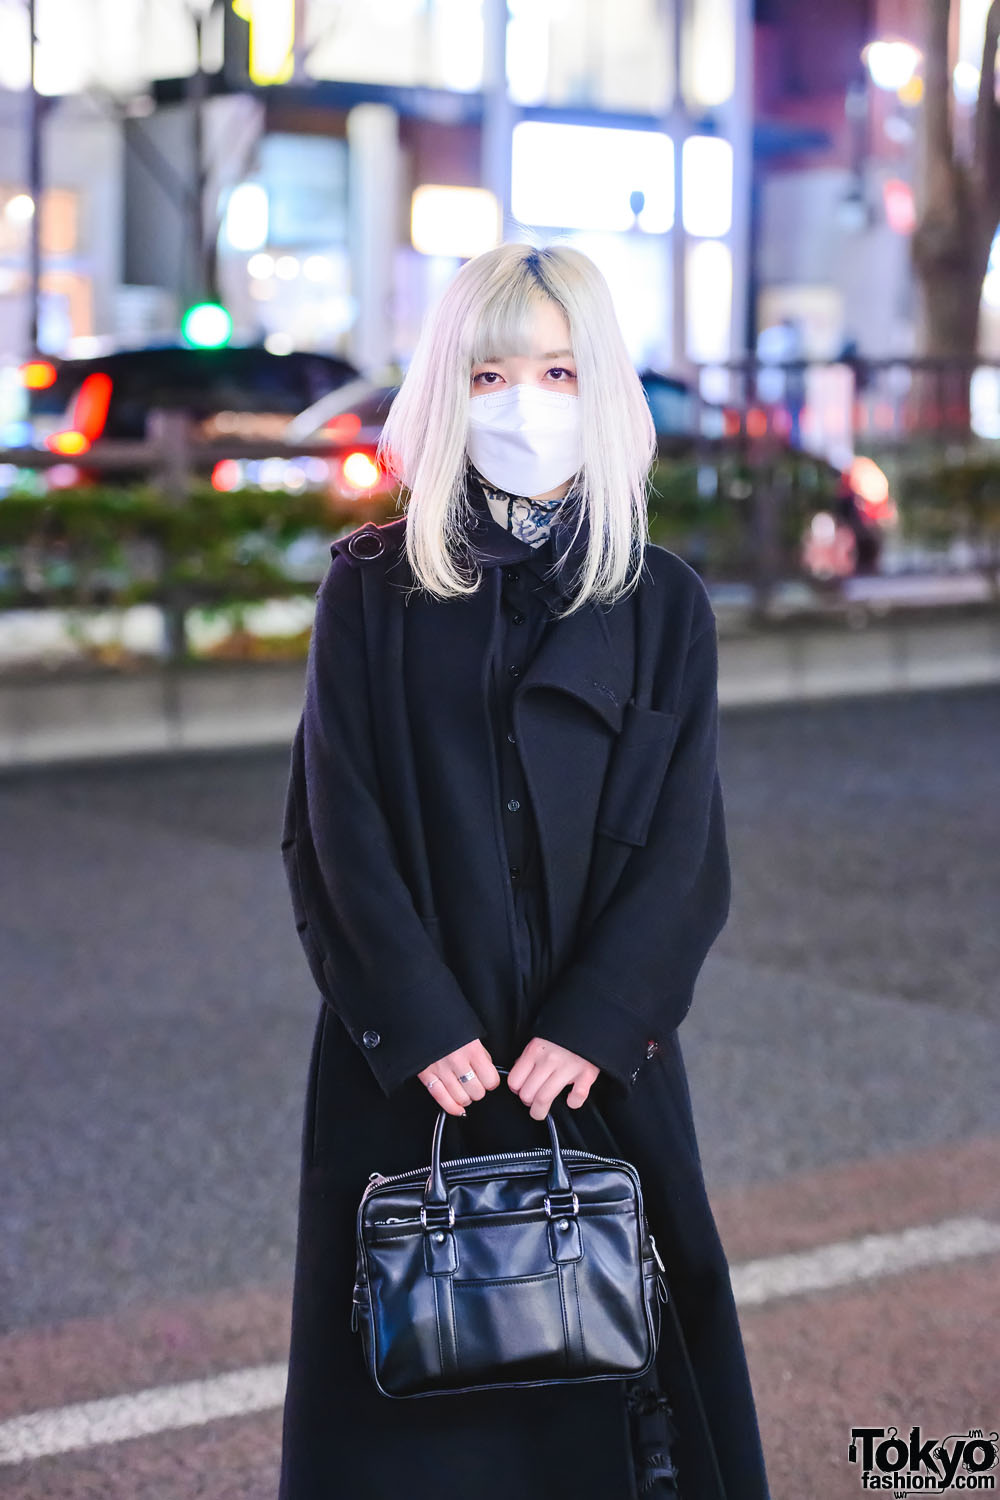 Silver Issey Miyake Suit & Comme des Garcons Monochrome Look in Tokyo –  Tokyo Fashion